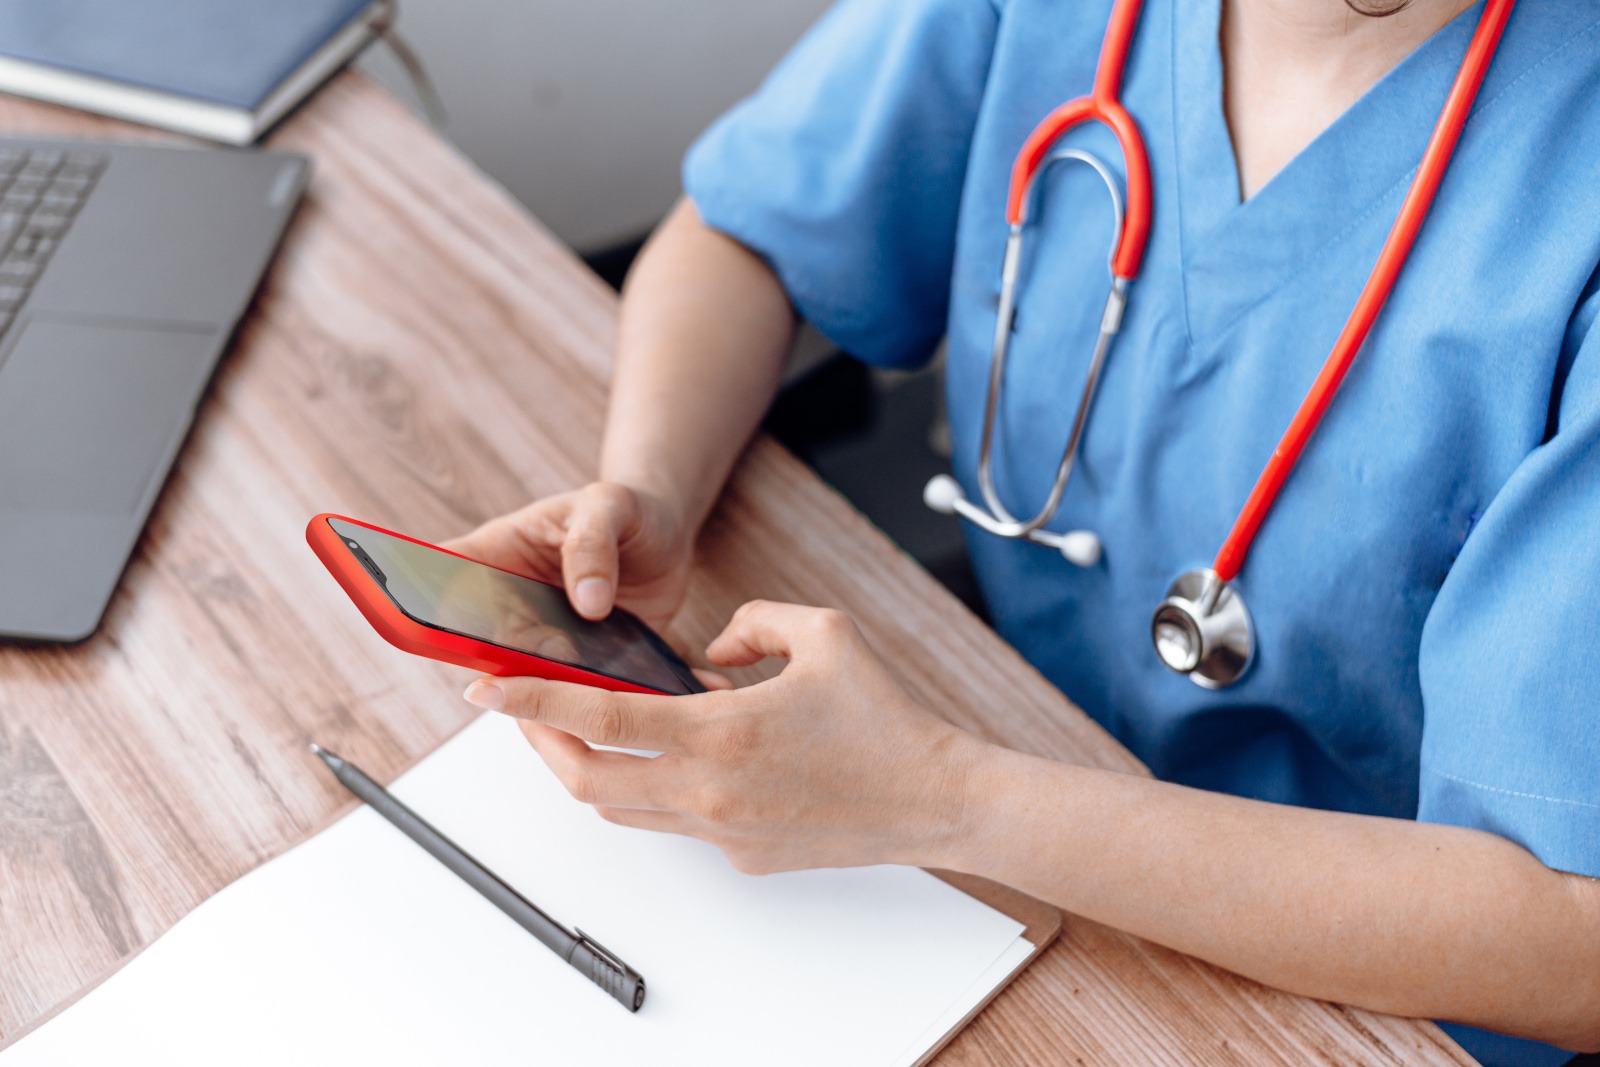 Nurse submitting timesheet from desk using the WorkTracker workshift appointments app